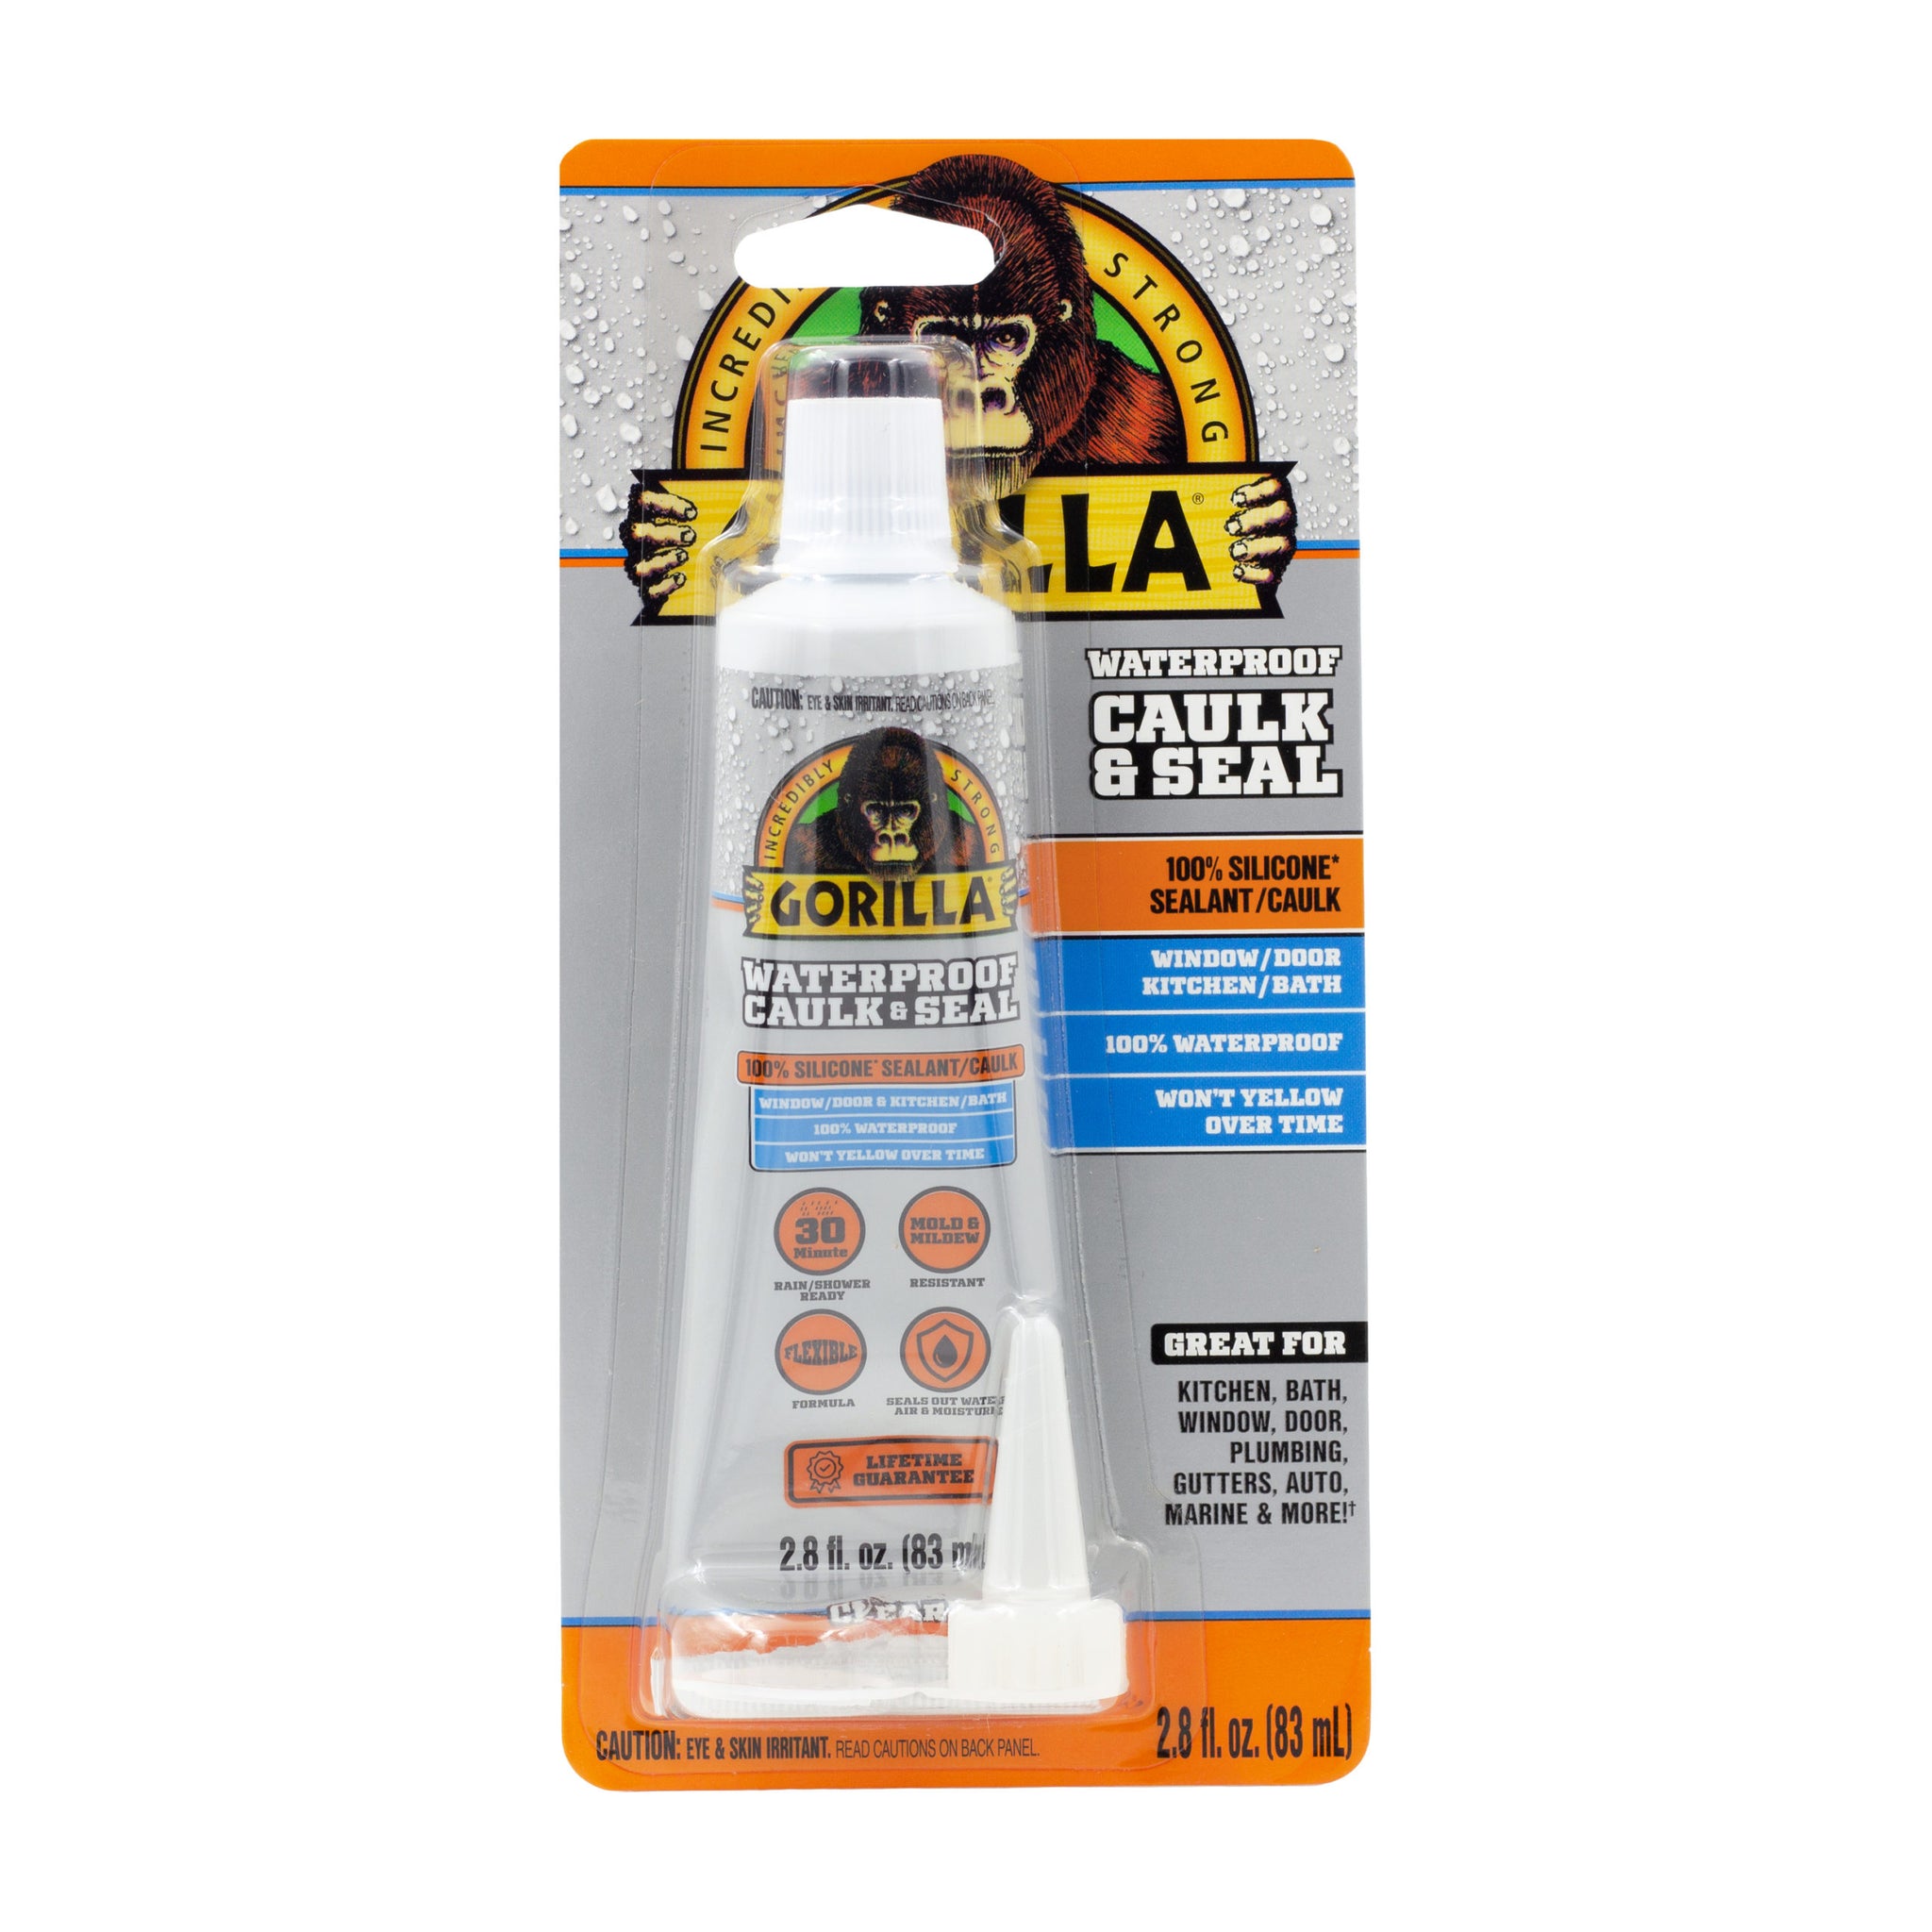 Gorilla Waterproof Caulk And Seal 100% Silicone Sealant (White) provides a strong waterproof seal that will not  mold  and mildew resistant – 109329